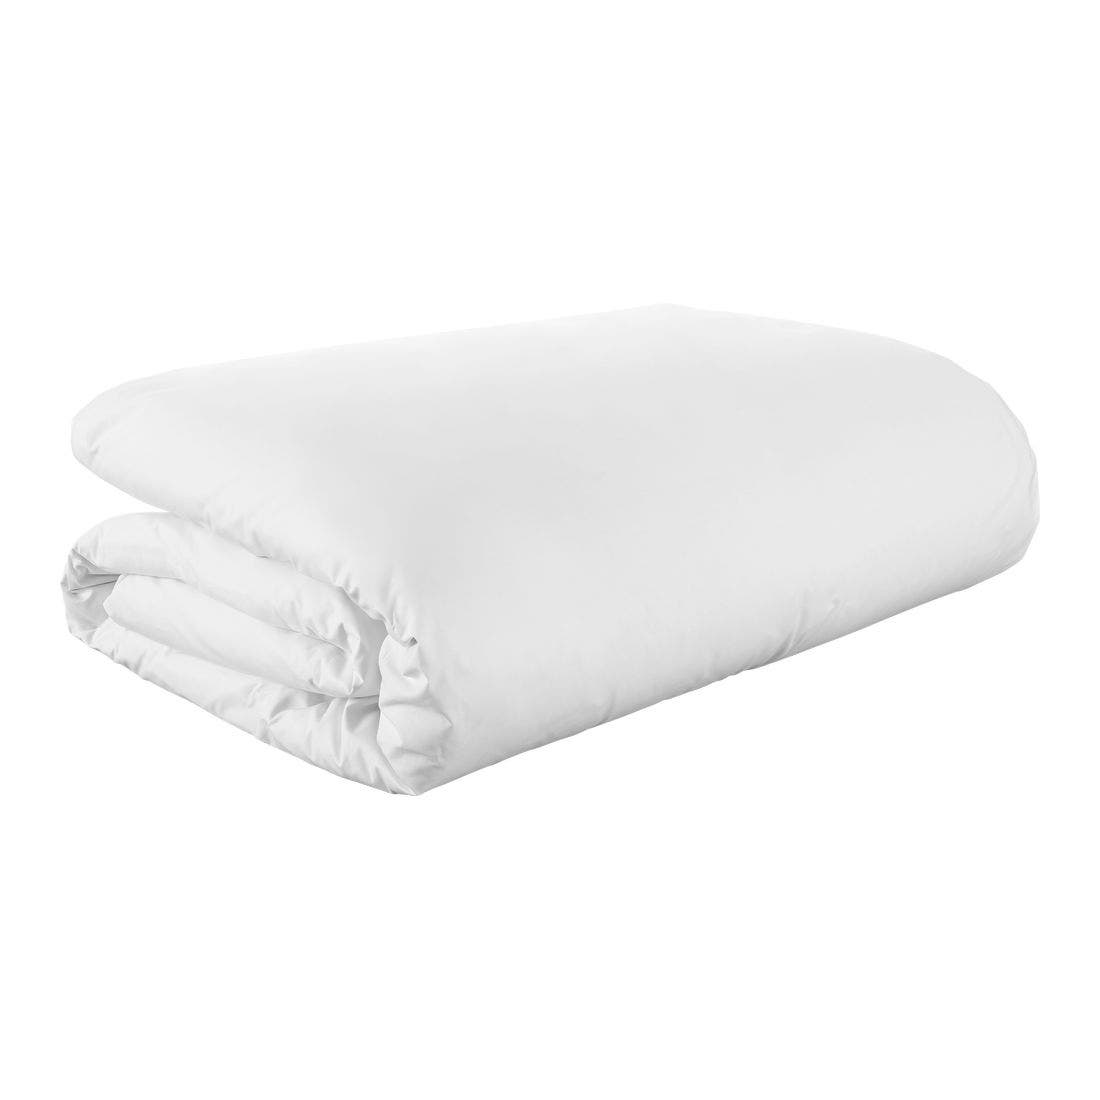 25020777-percale-ll-01